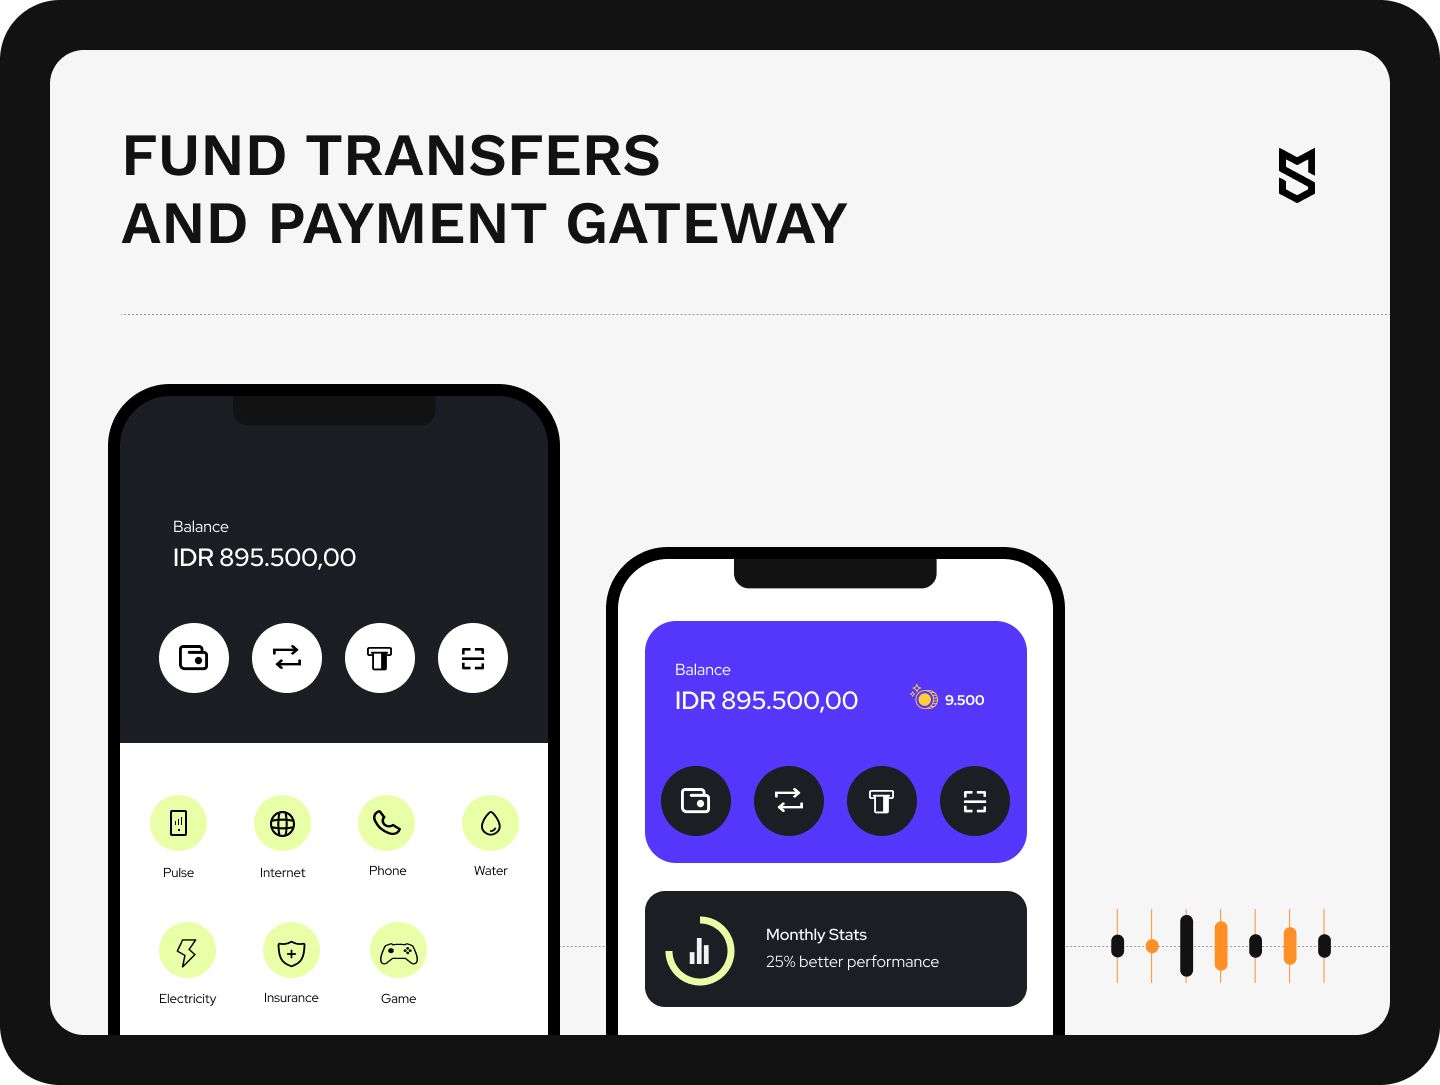 Fund transfers and payment gateway